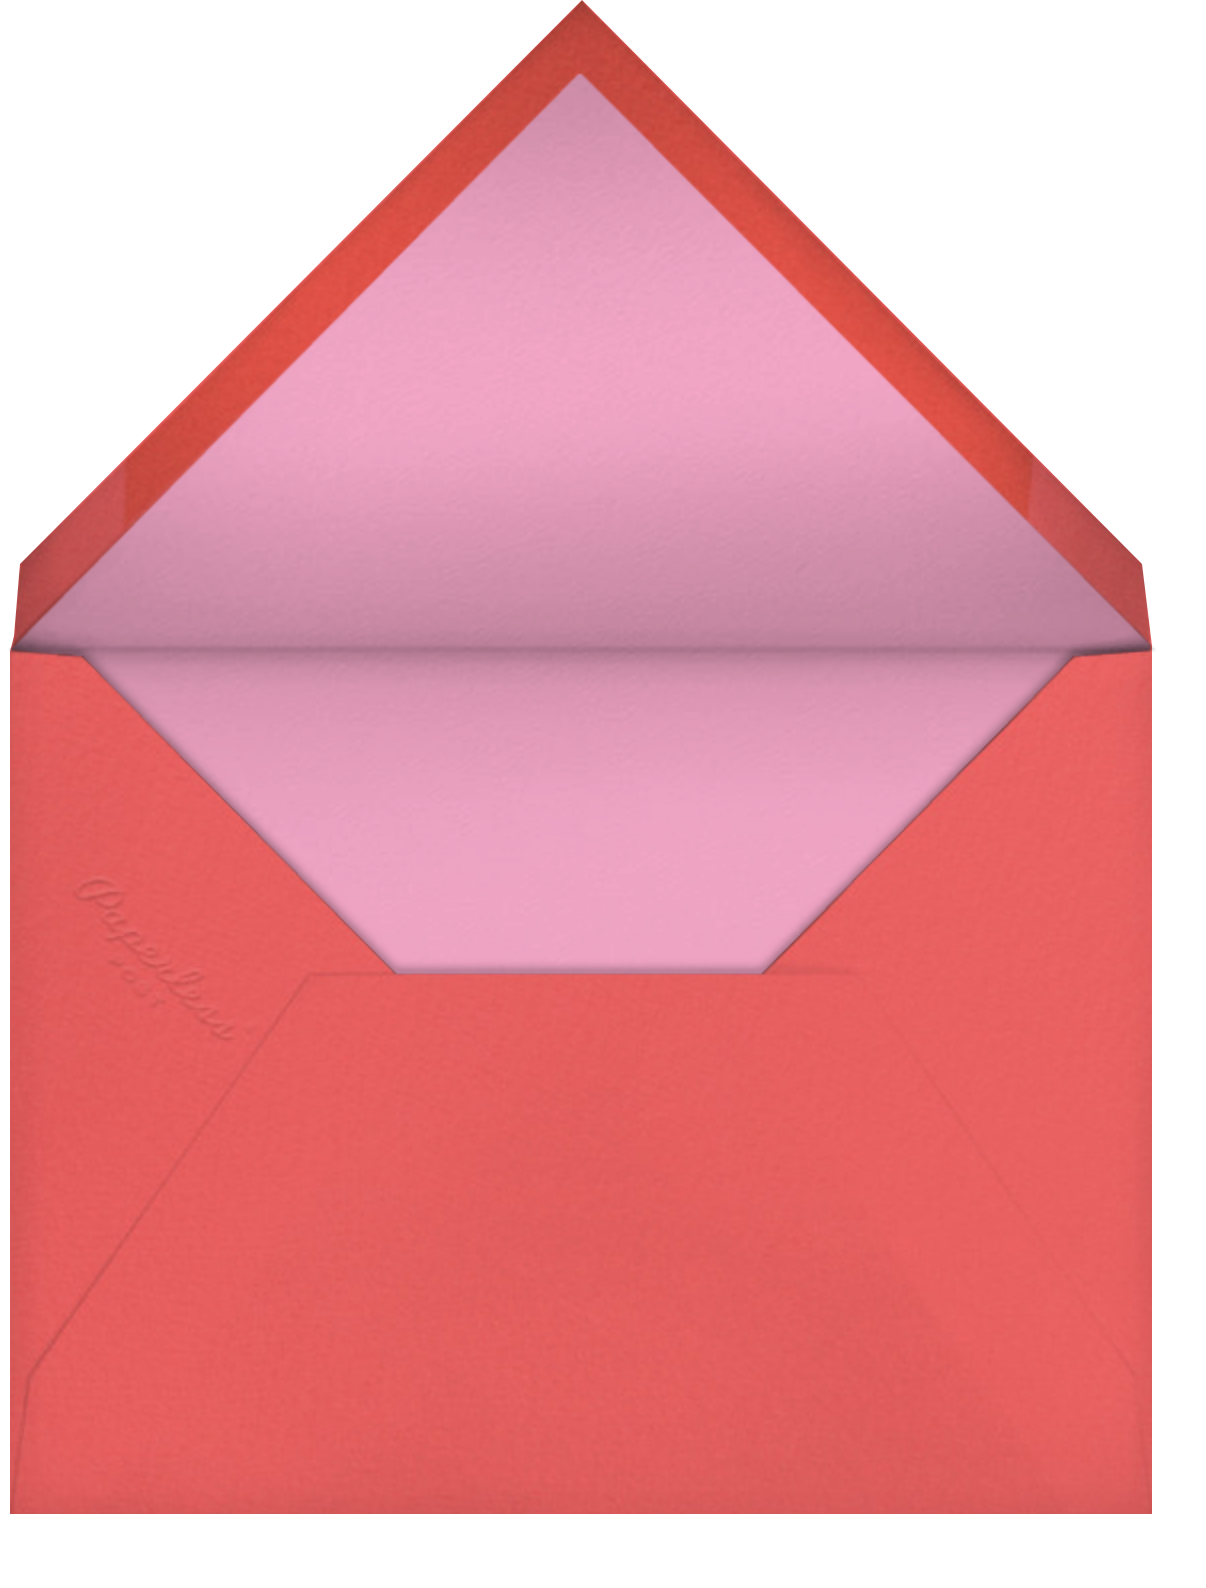 Puppy Eyes (Krista Perry) - Red Cap Cards - Envelope